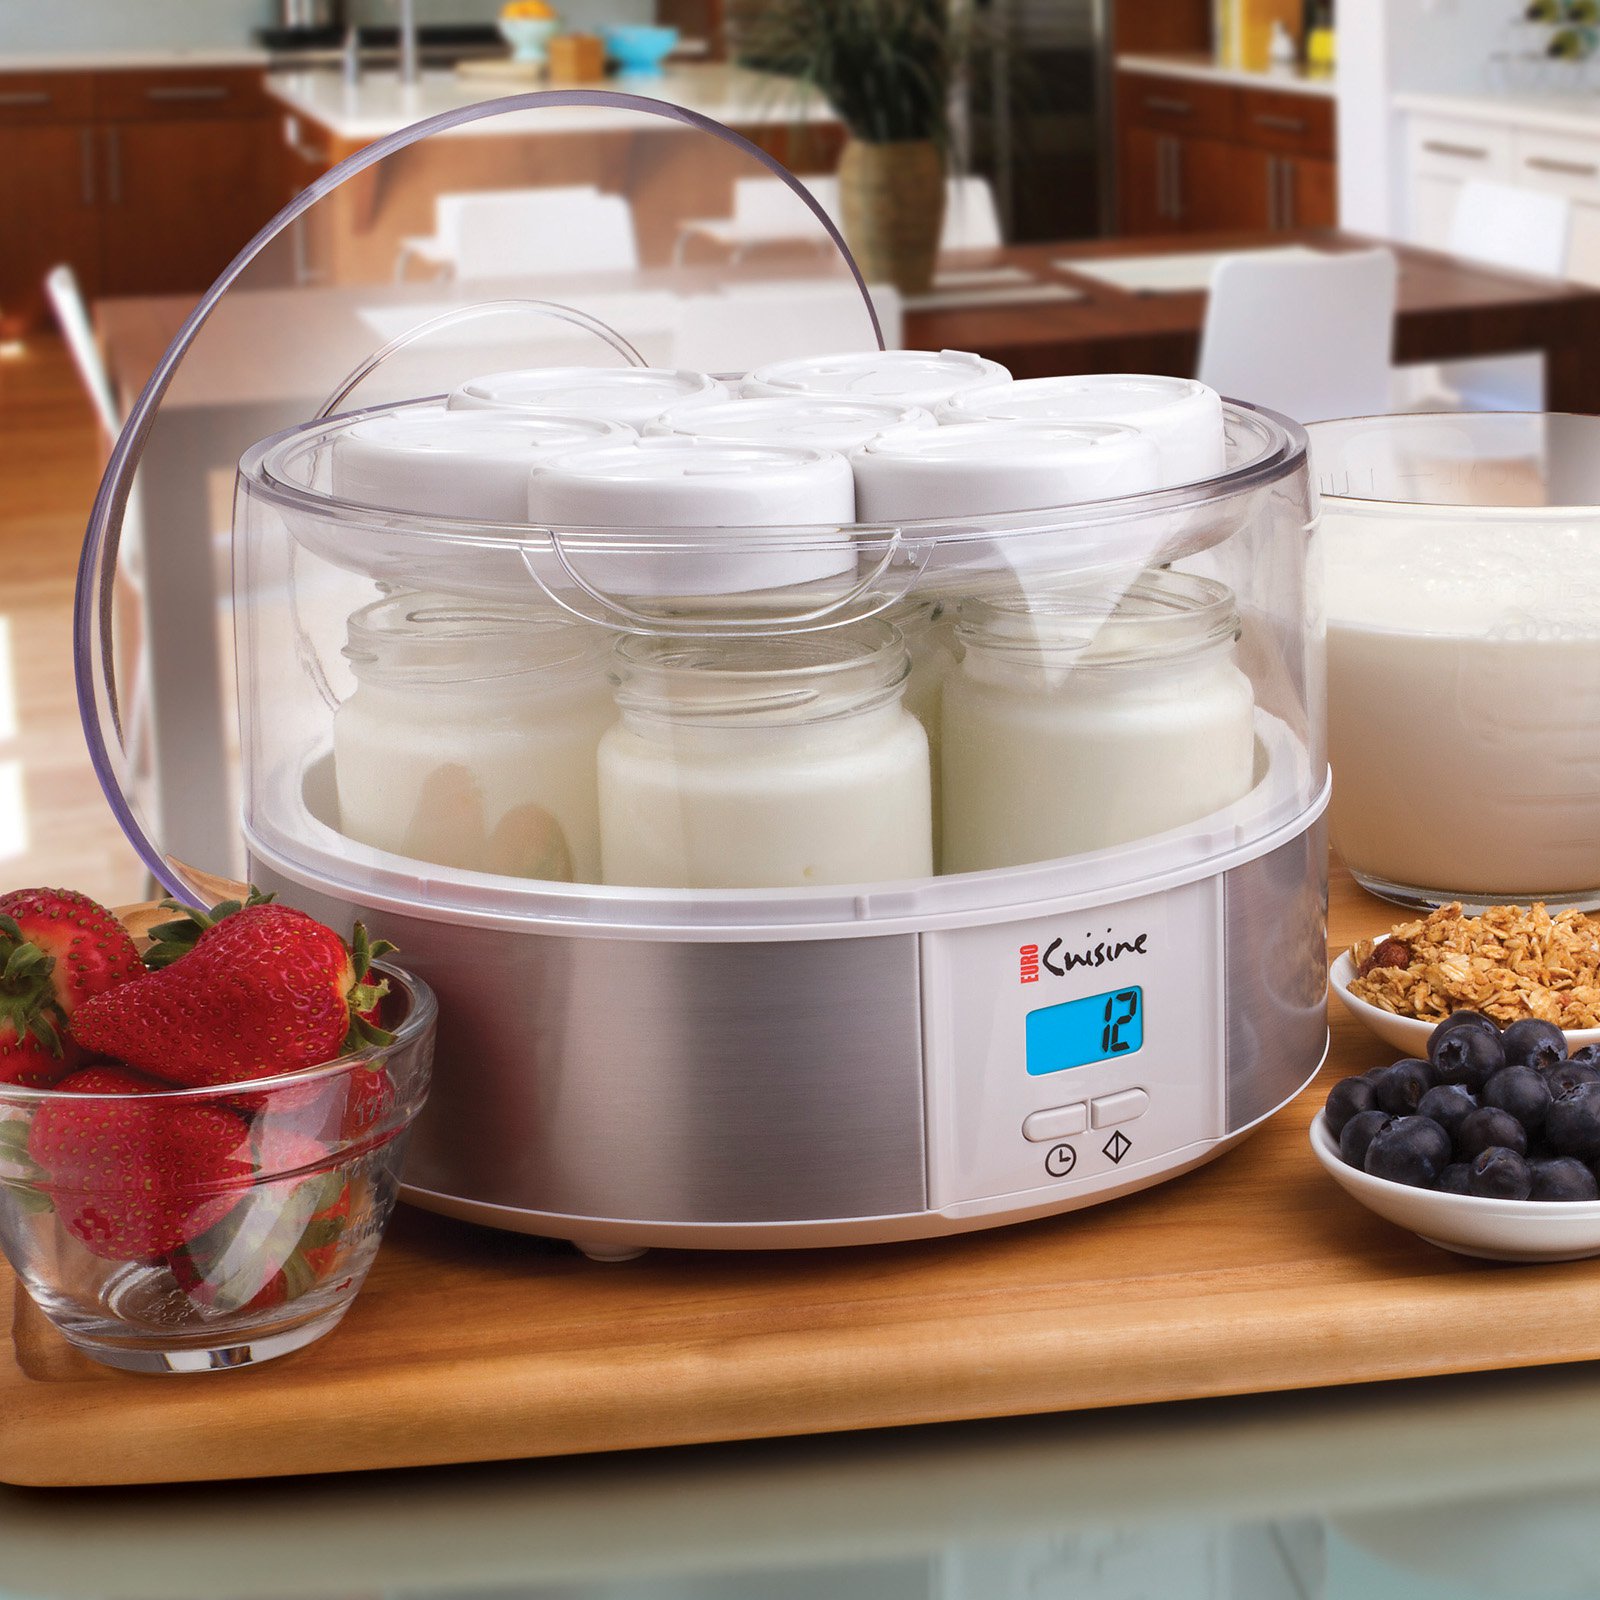 Euro Cuisine YMX650 Digital Yogurt Maker with 7 Glass Jars and 15 hours Timer - image 1 of 4